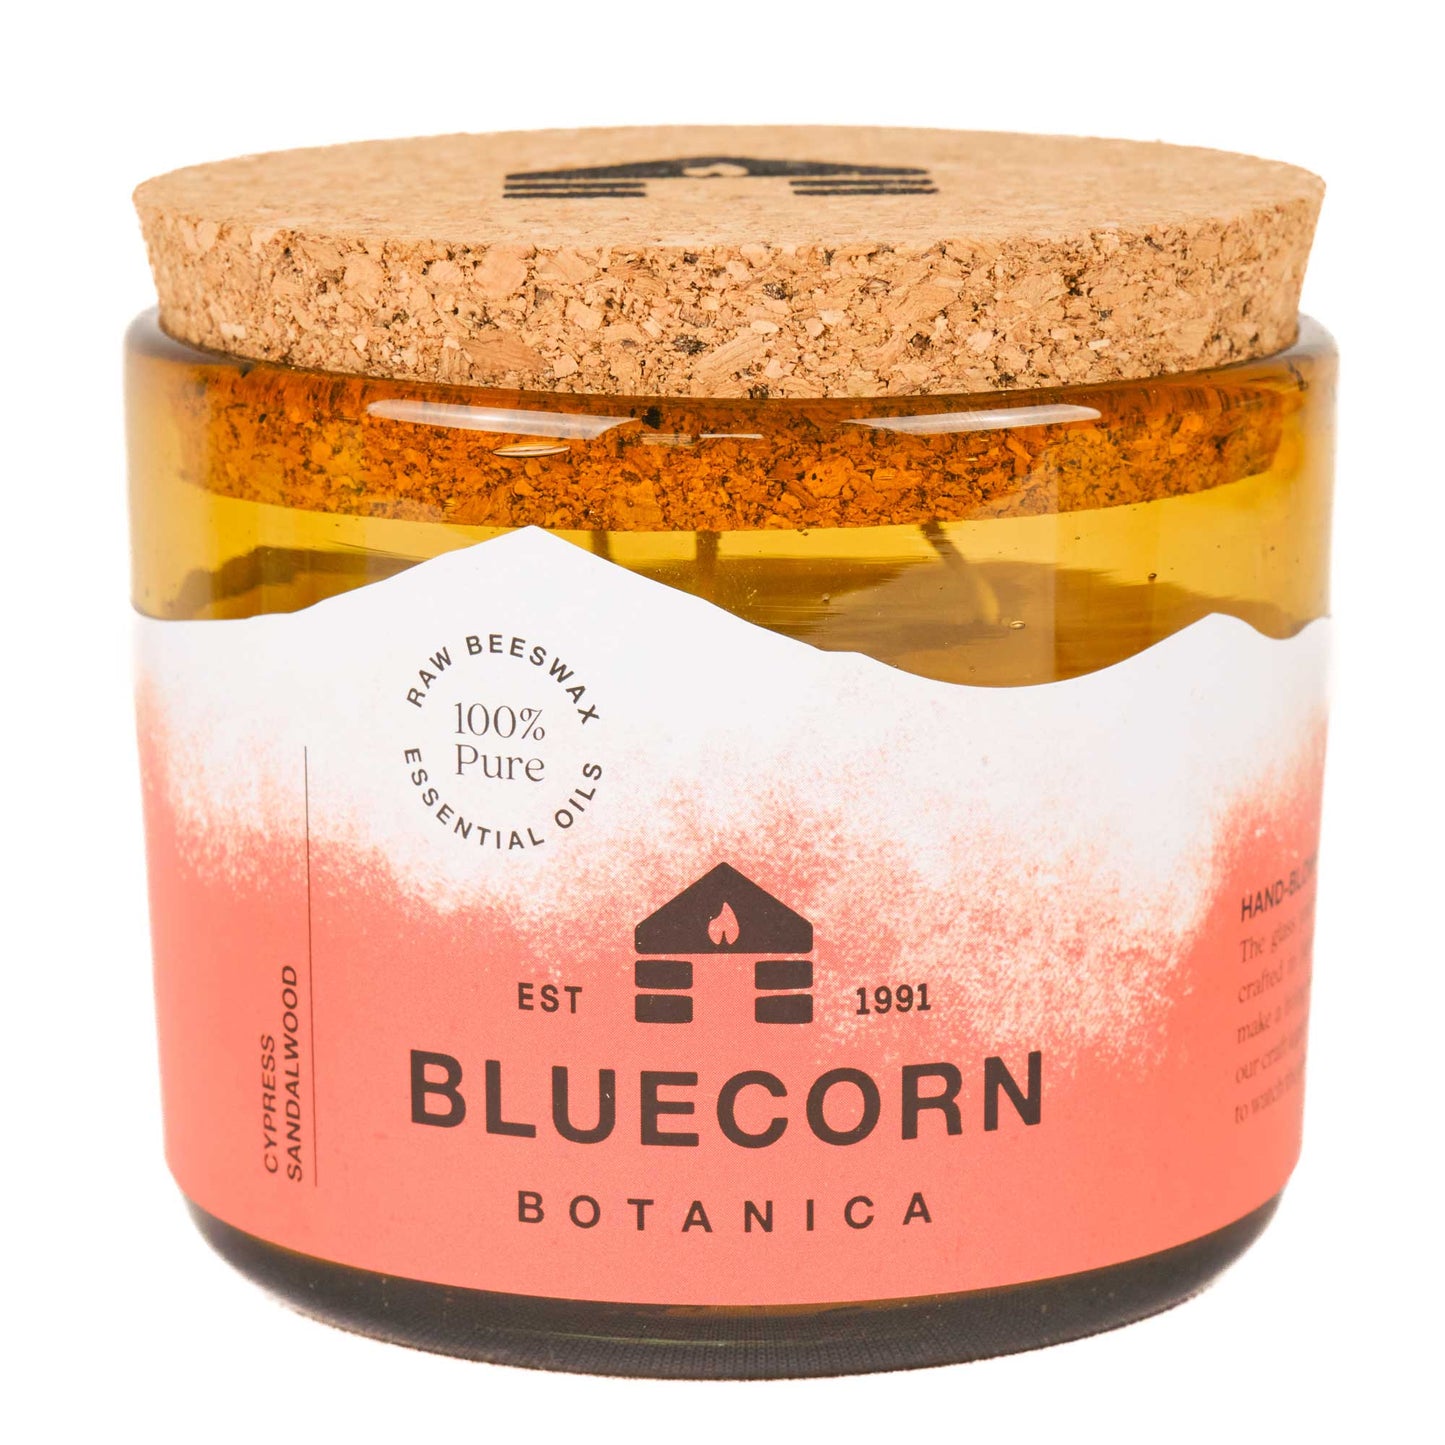 bluecorn candles scented beeswax candle made with pure essential oils in a blown glass holder